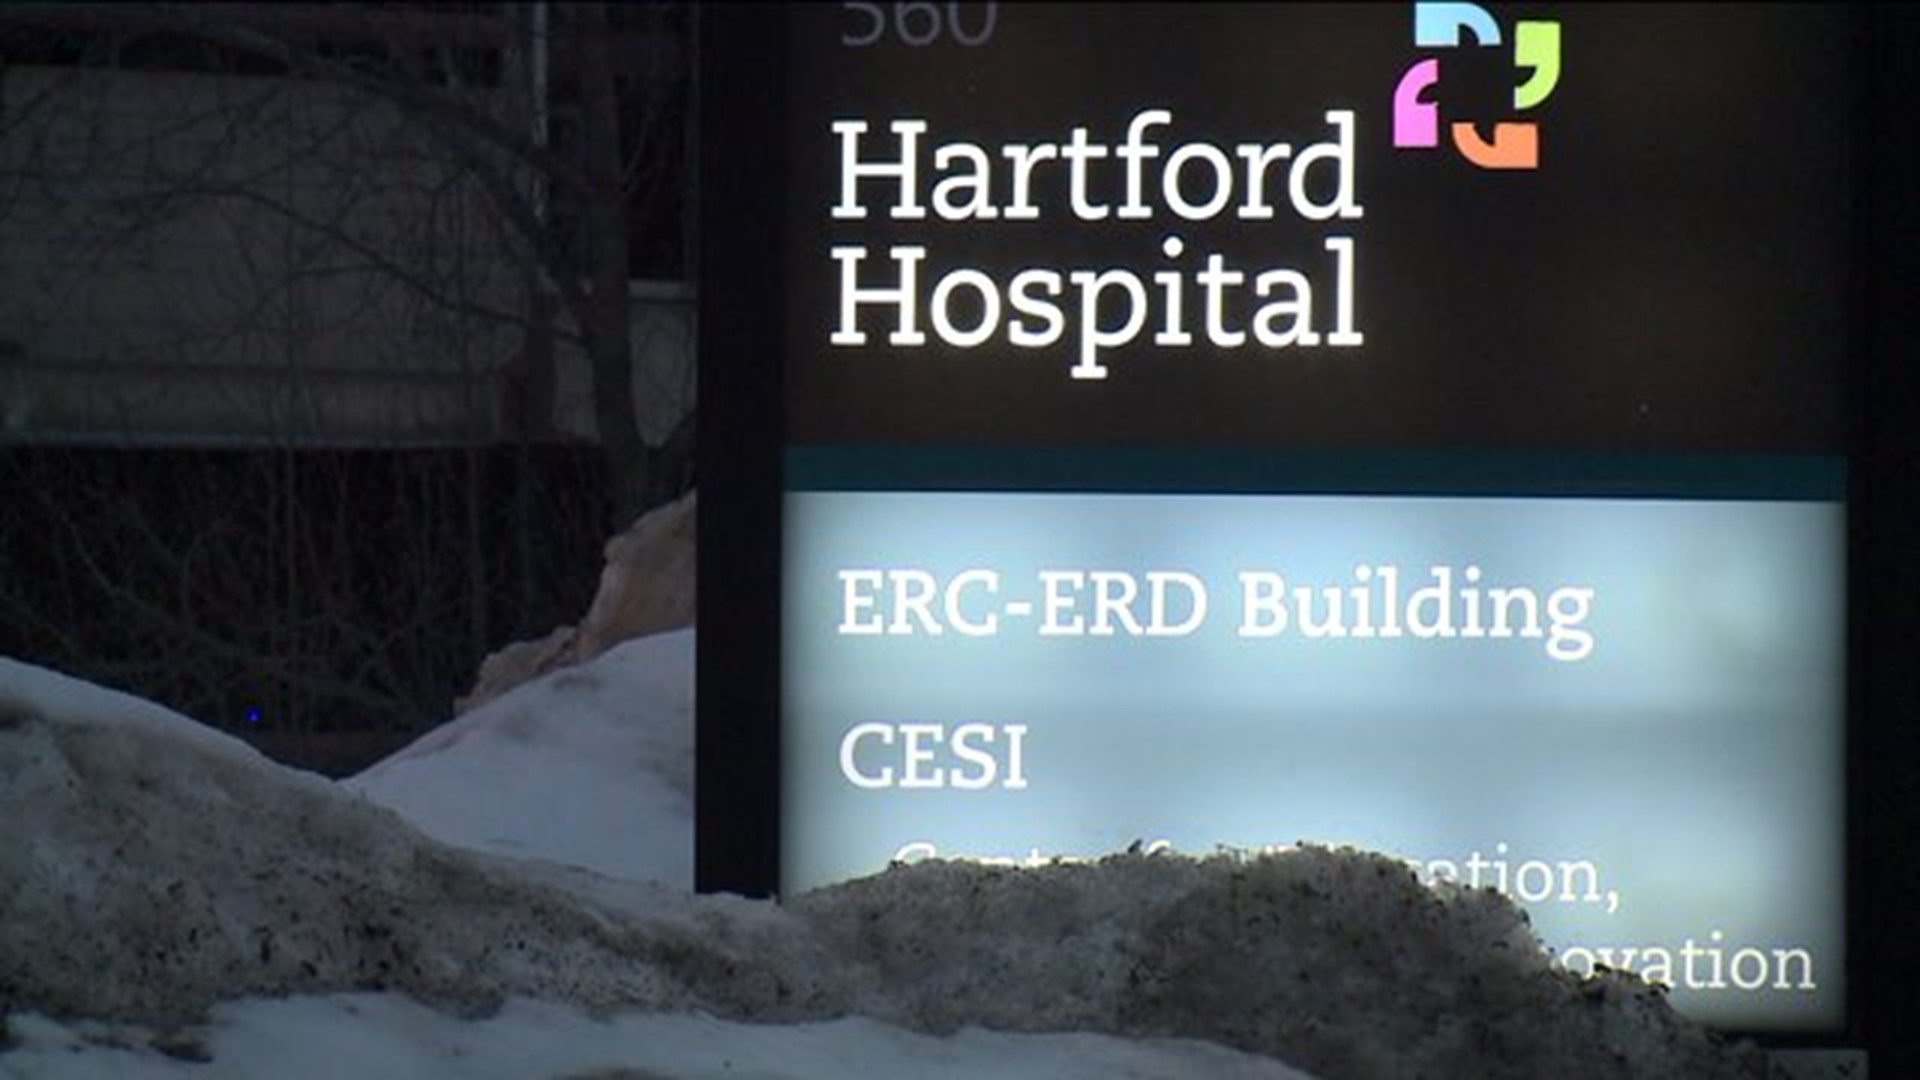 Patients at Hartford Hospital exposed to E. coli